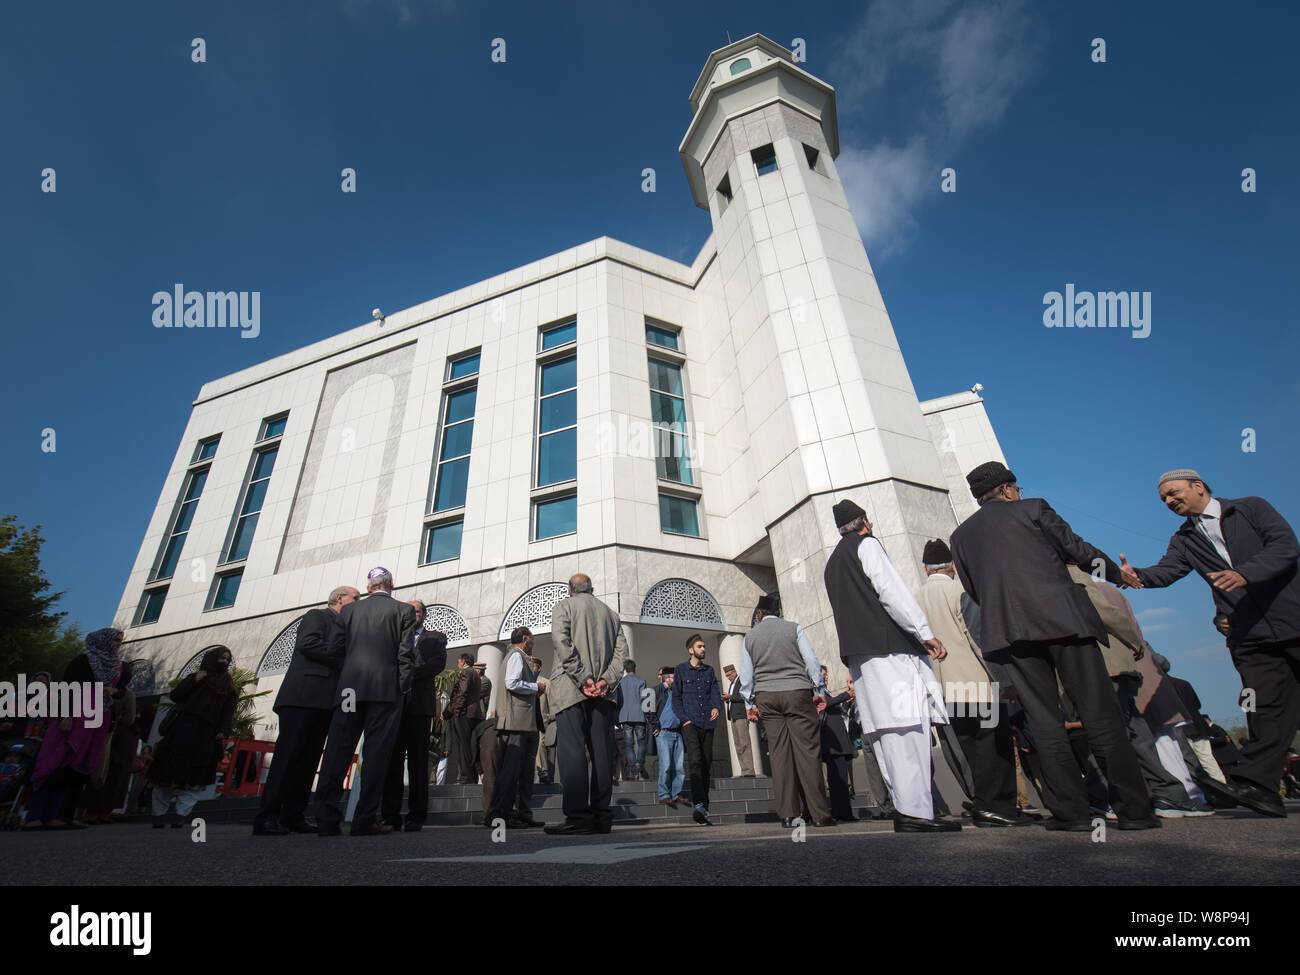 Baitul Futuh Mosque, Morden, London, UK. 2nd October 2015.  Morden's Baitul Futuh Mosque, opened it's doors to thousands of Muslim faithful for Friday Stock Photo